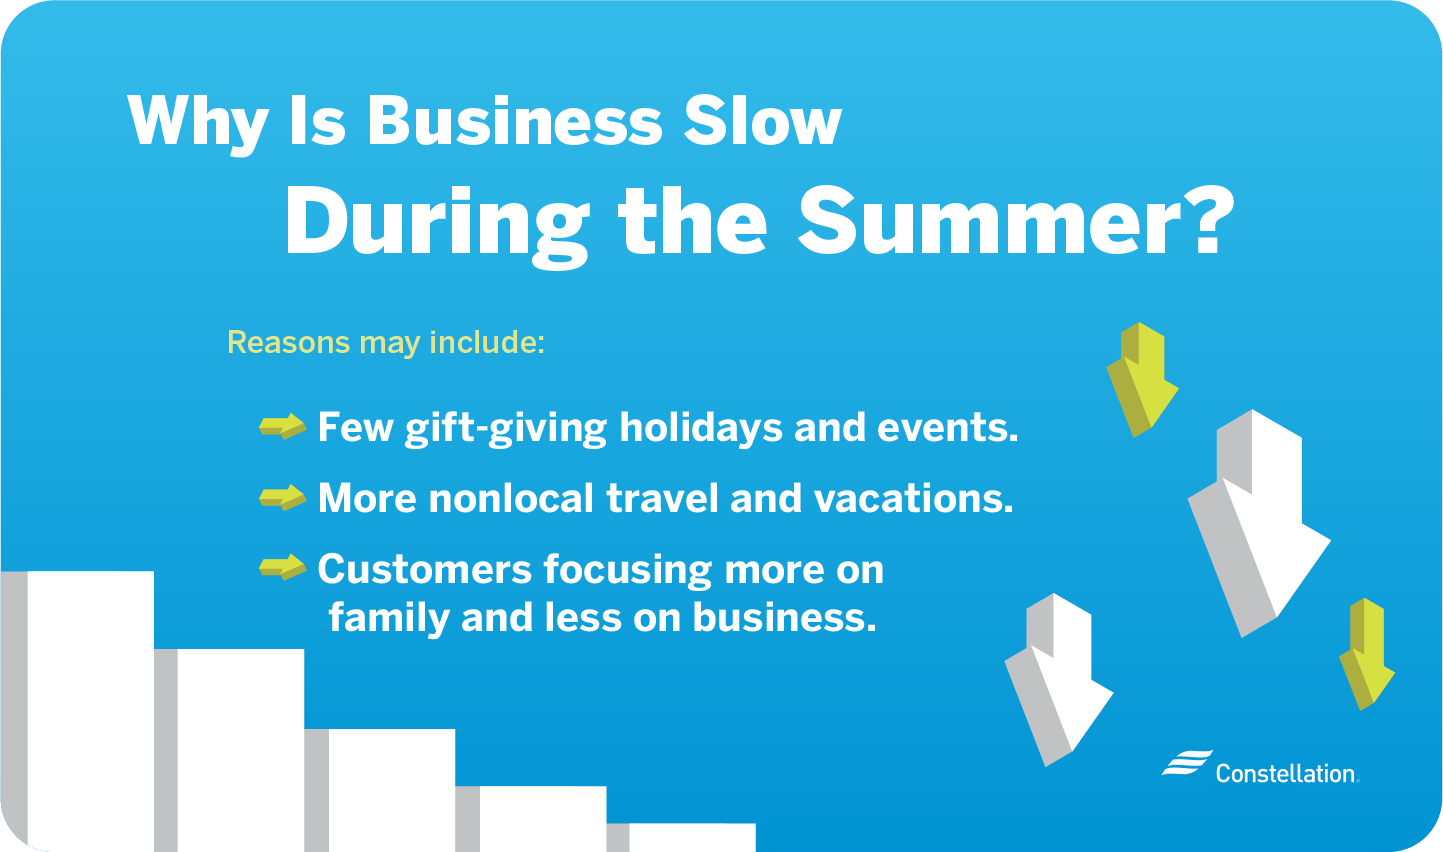 Why is business slow during the summer?